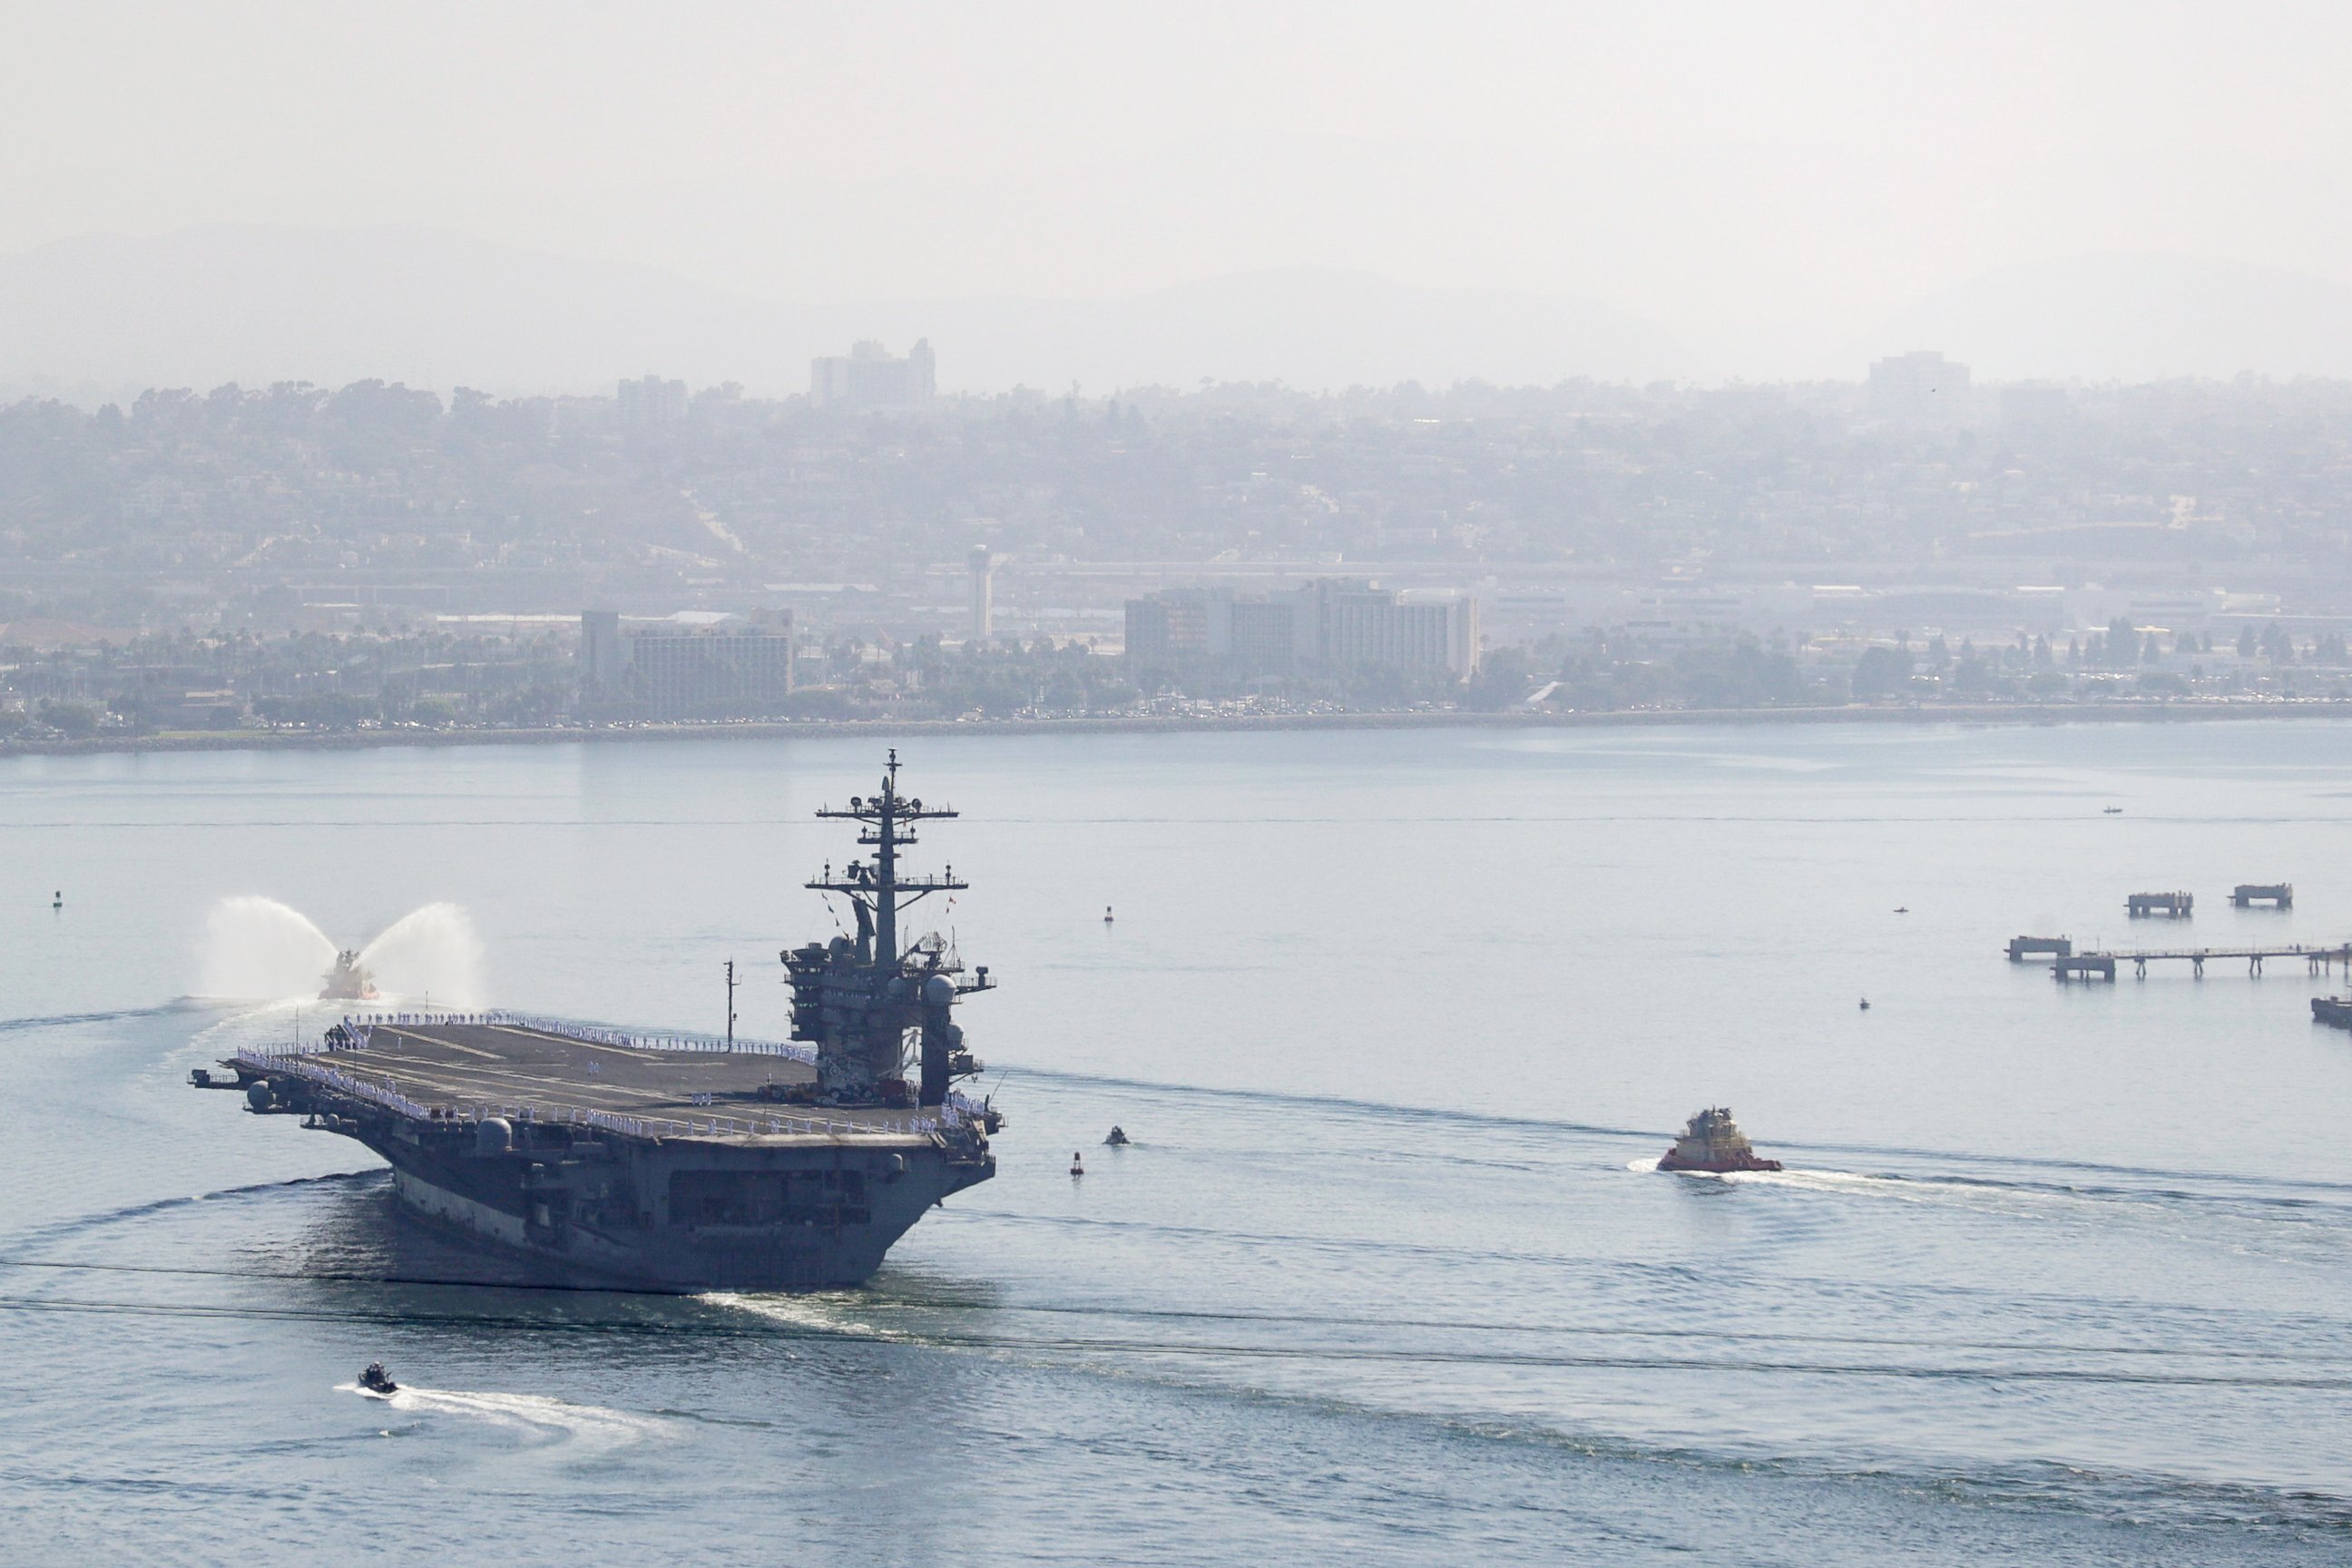 PHOTO: The USS Theodore Roosevelt aircraft carrier makes its way into San Diego Bay Thursday, July 9, 2020, seen from San Diego.
